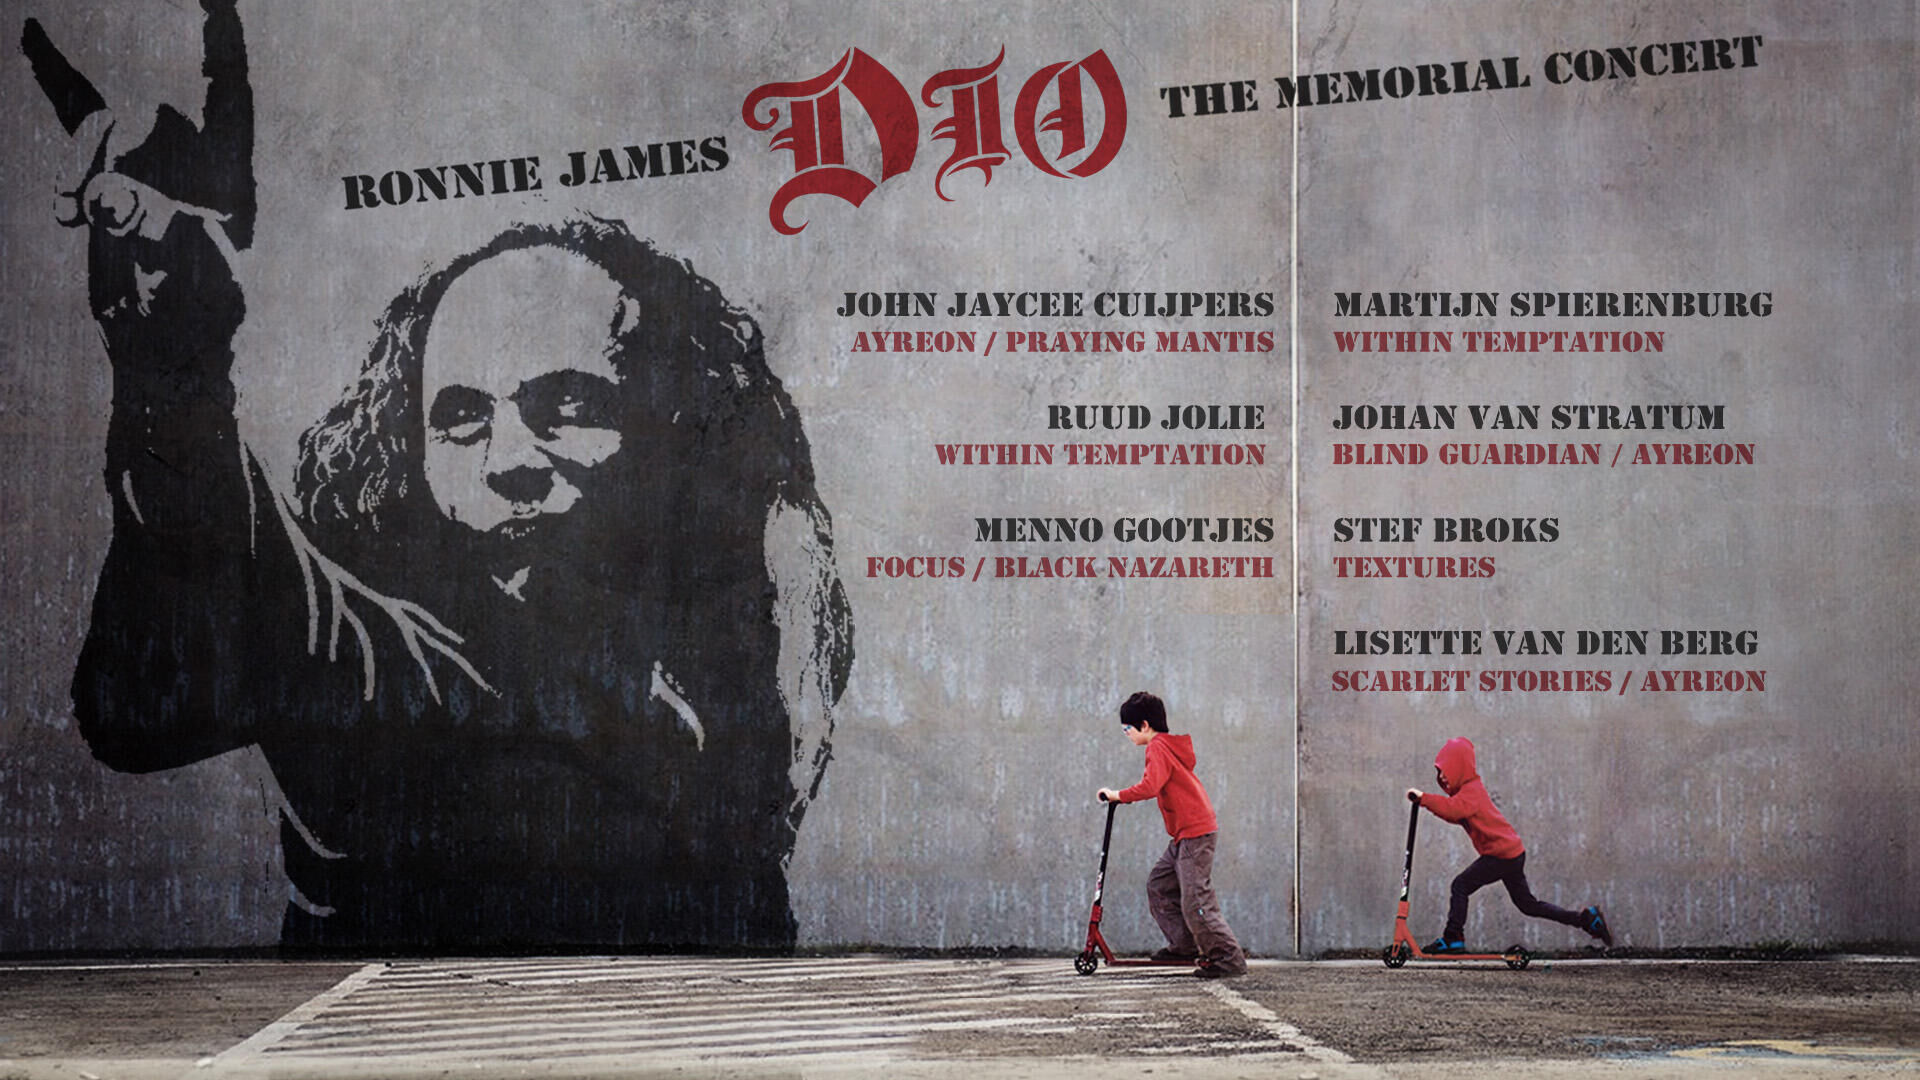 Ronnie James Dio - The Memorial Concert